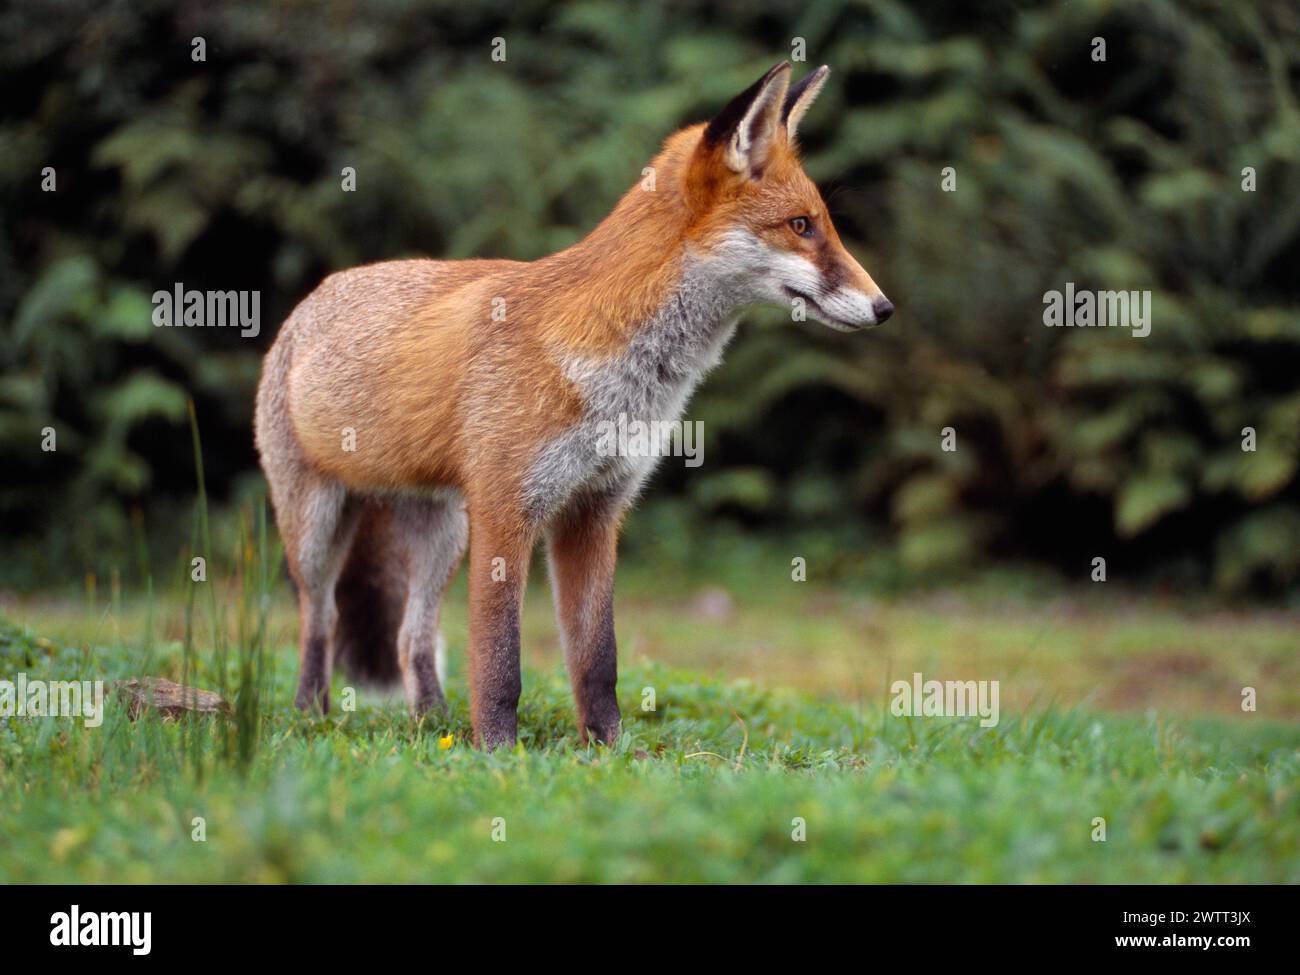 Red Fox (Vulpes vulpes) semi-habituated male dog fox in rural garden, Loch Lomond and the Trossachs National Park, Stirlingshire, Scotland, September Stock Photo